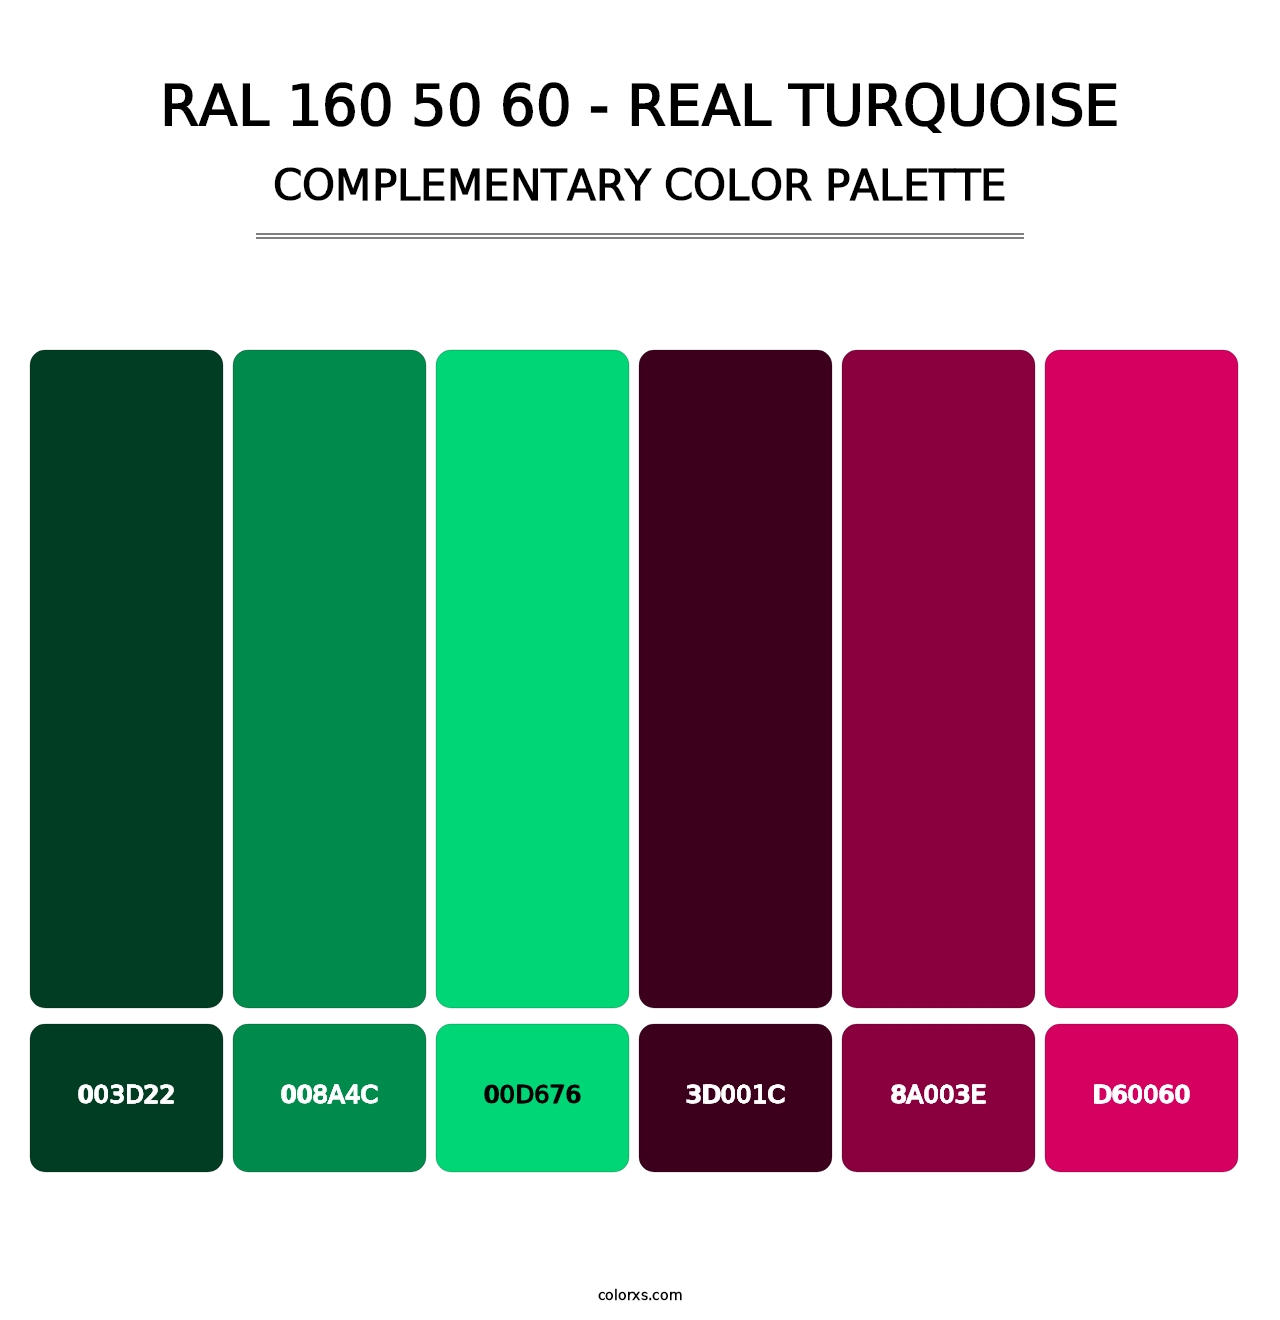 RAL 160 50 60 - Real Turquoise - Complementary Color Palette